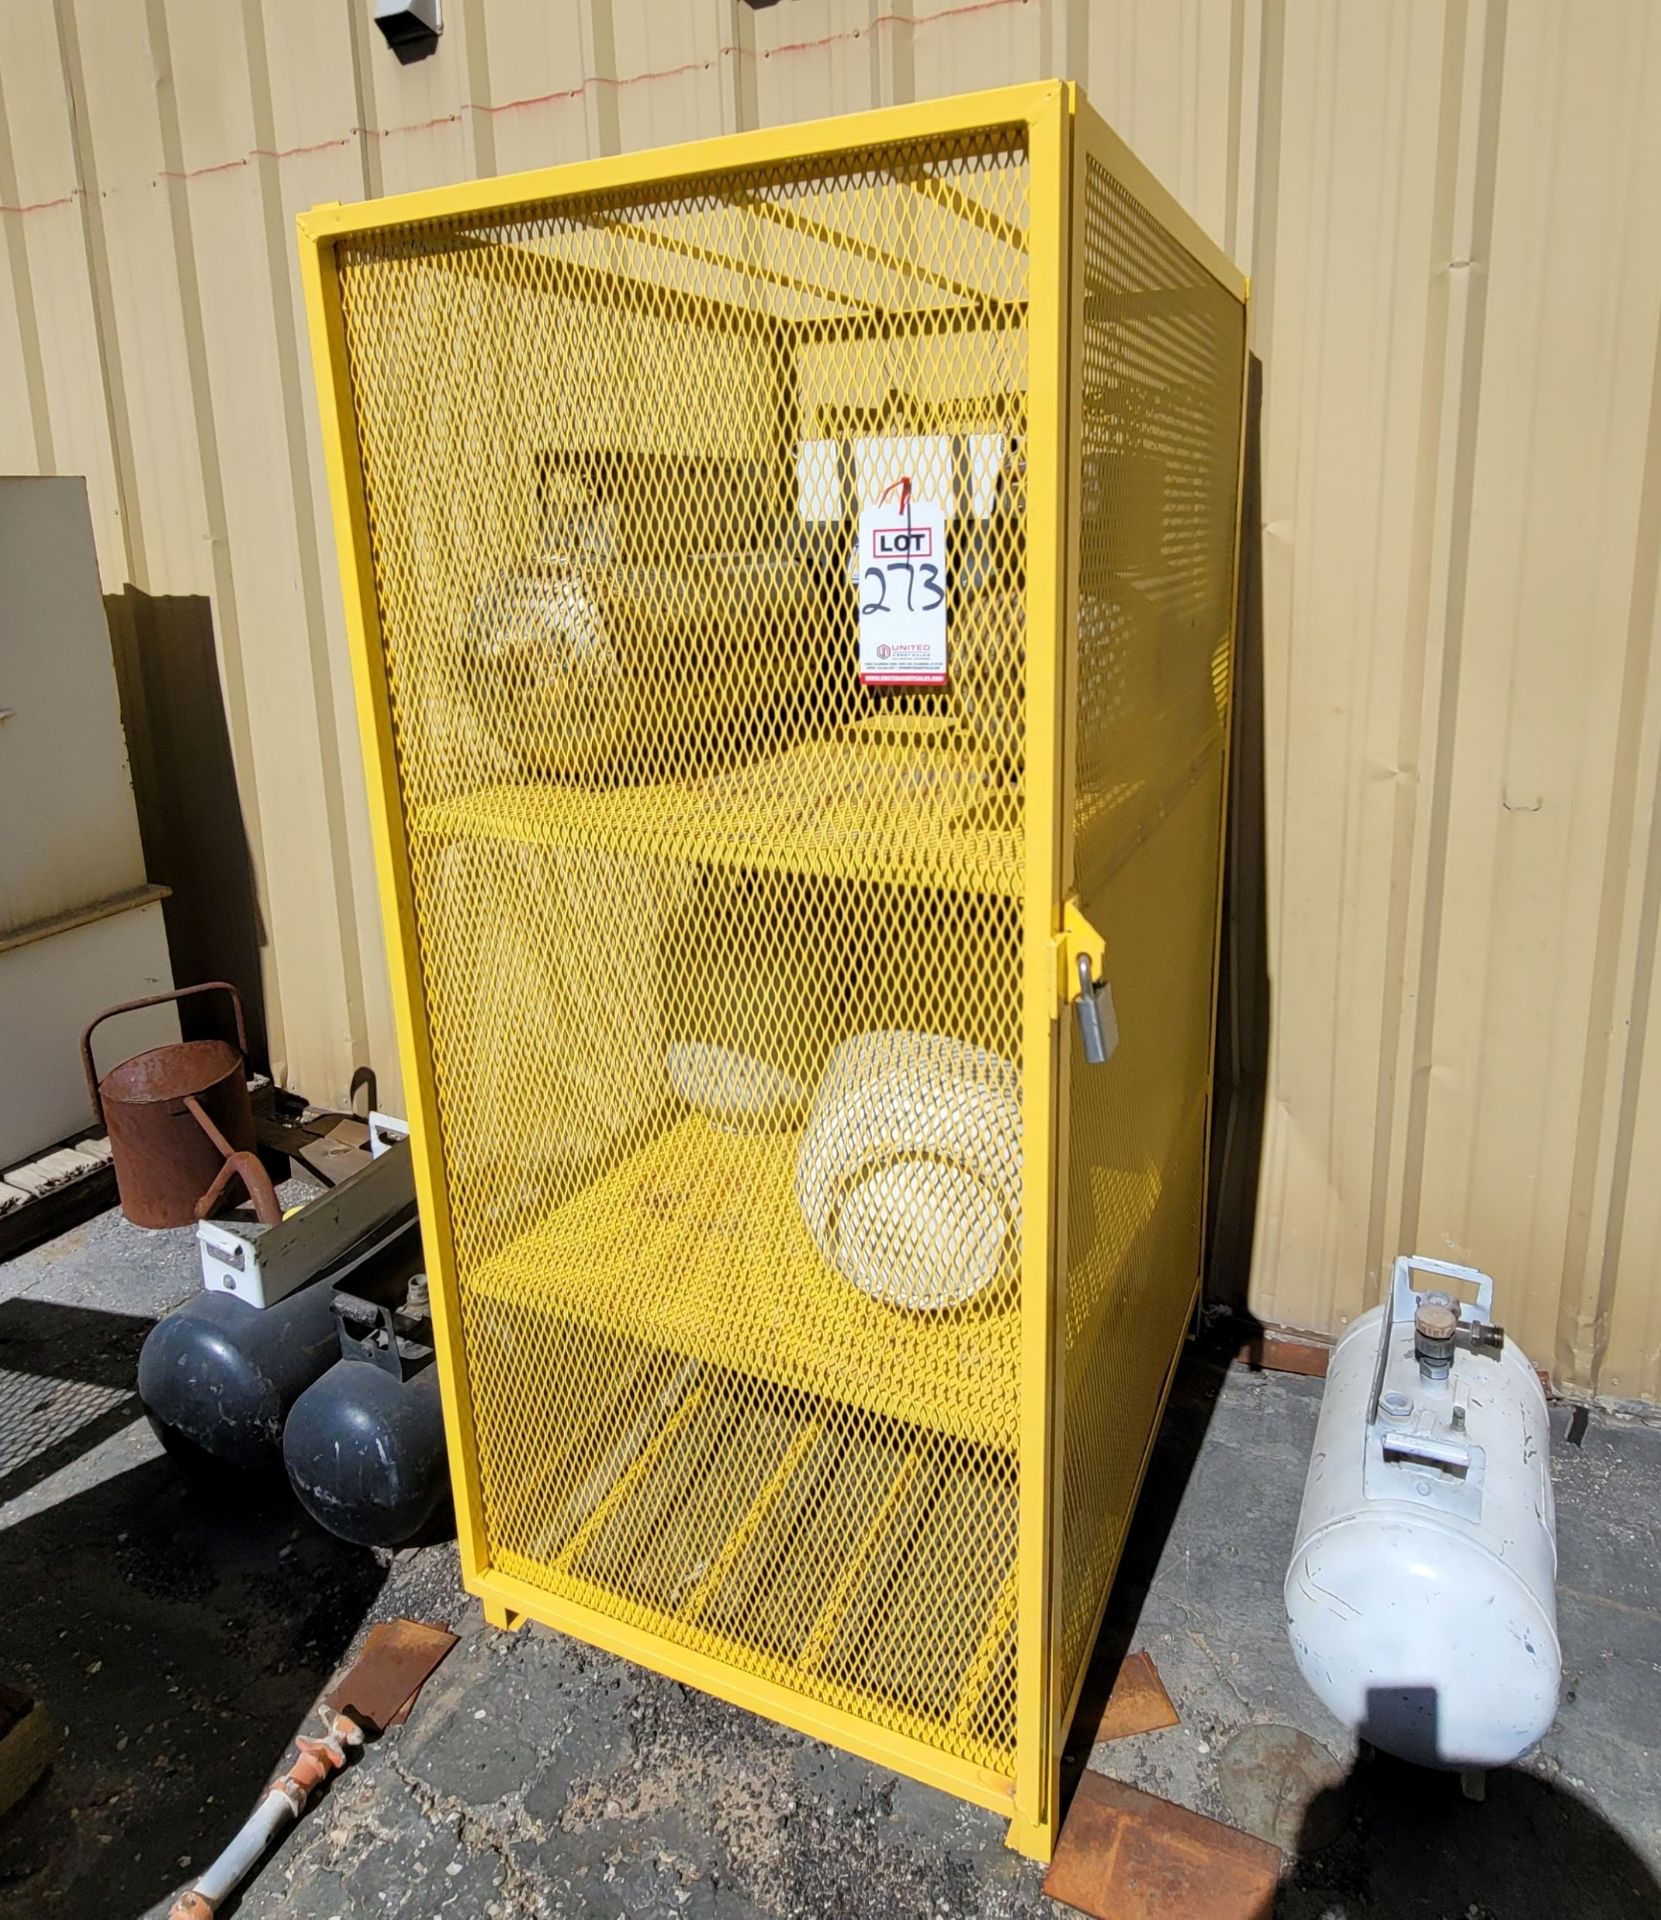 PROPANE TANK STORAGE CAGE, 32" X 40" X 71" HT, NO TANKS INCLUDED